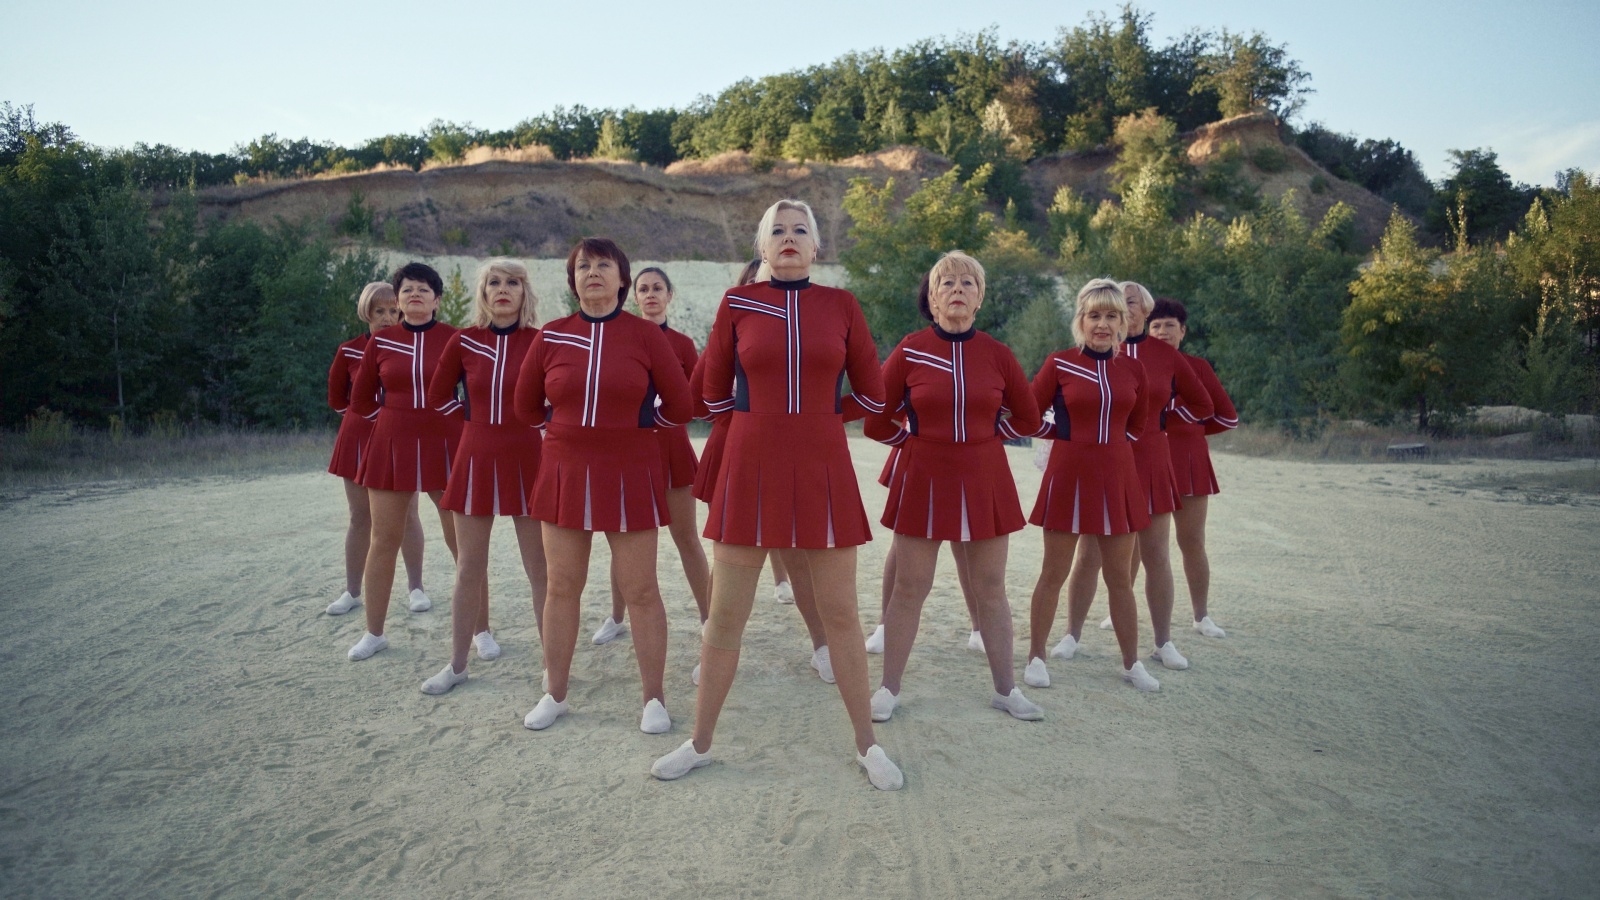 eng: A cheerleading squad of senior women in red suits.